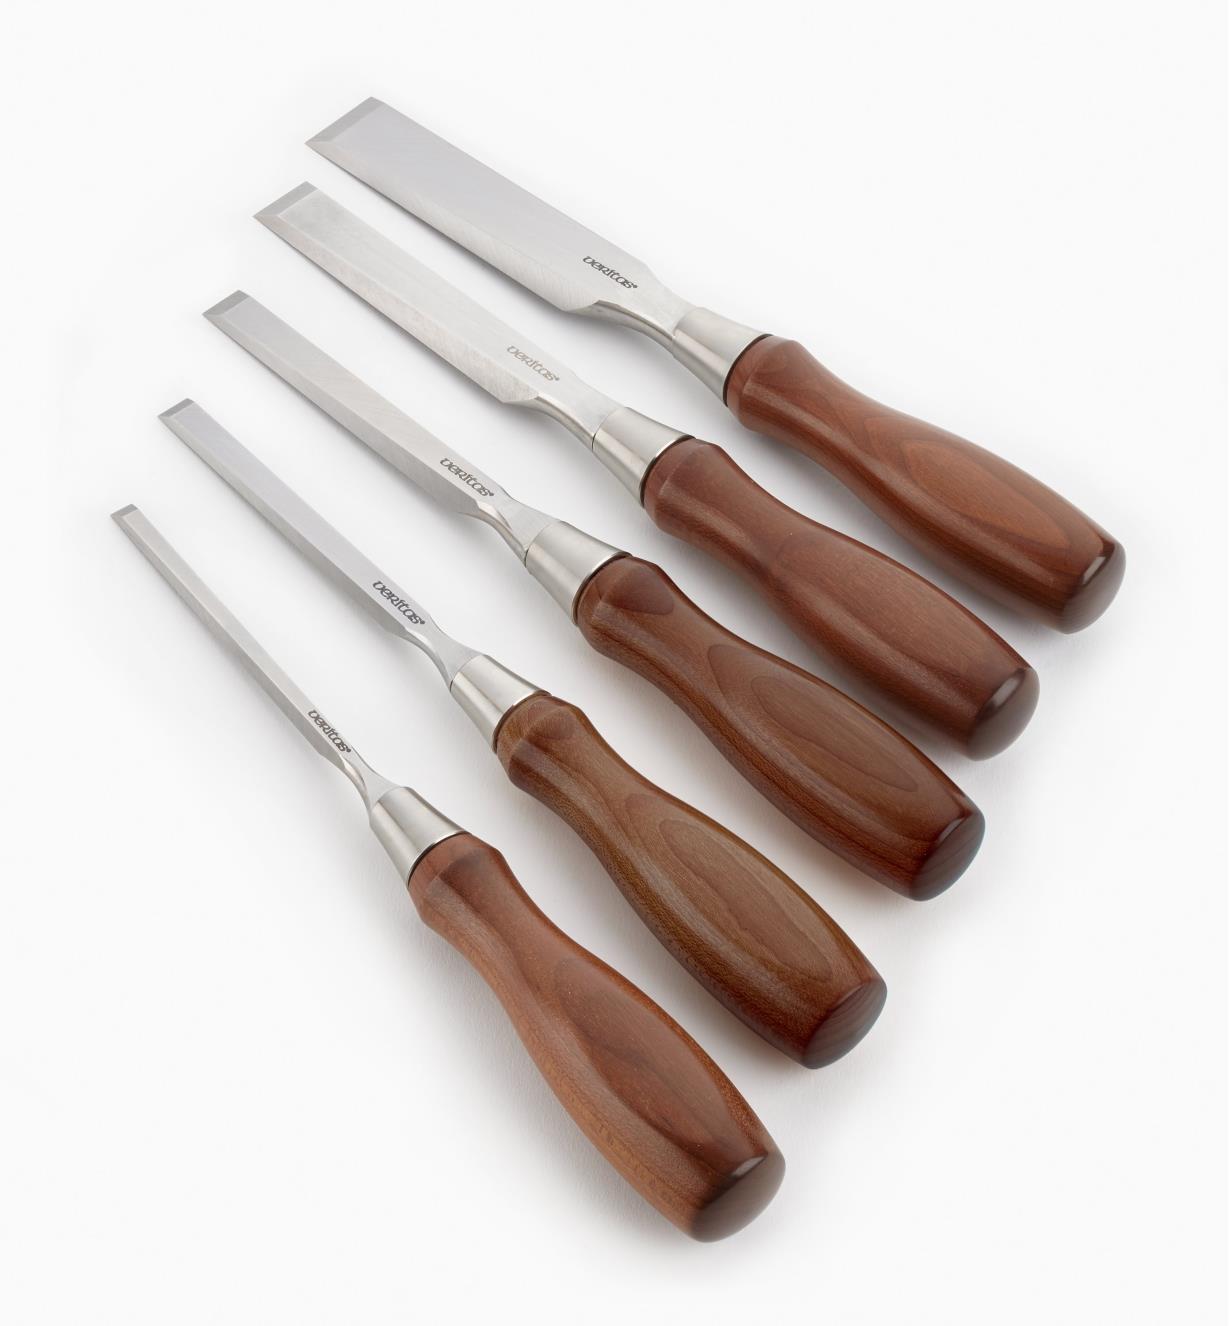 05S2050 - Set of all 5 Veritas O1 Bench Chisels